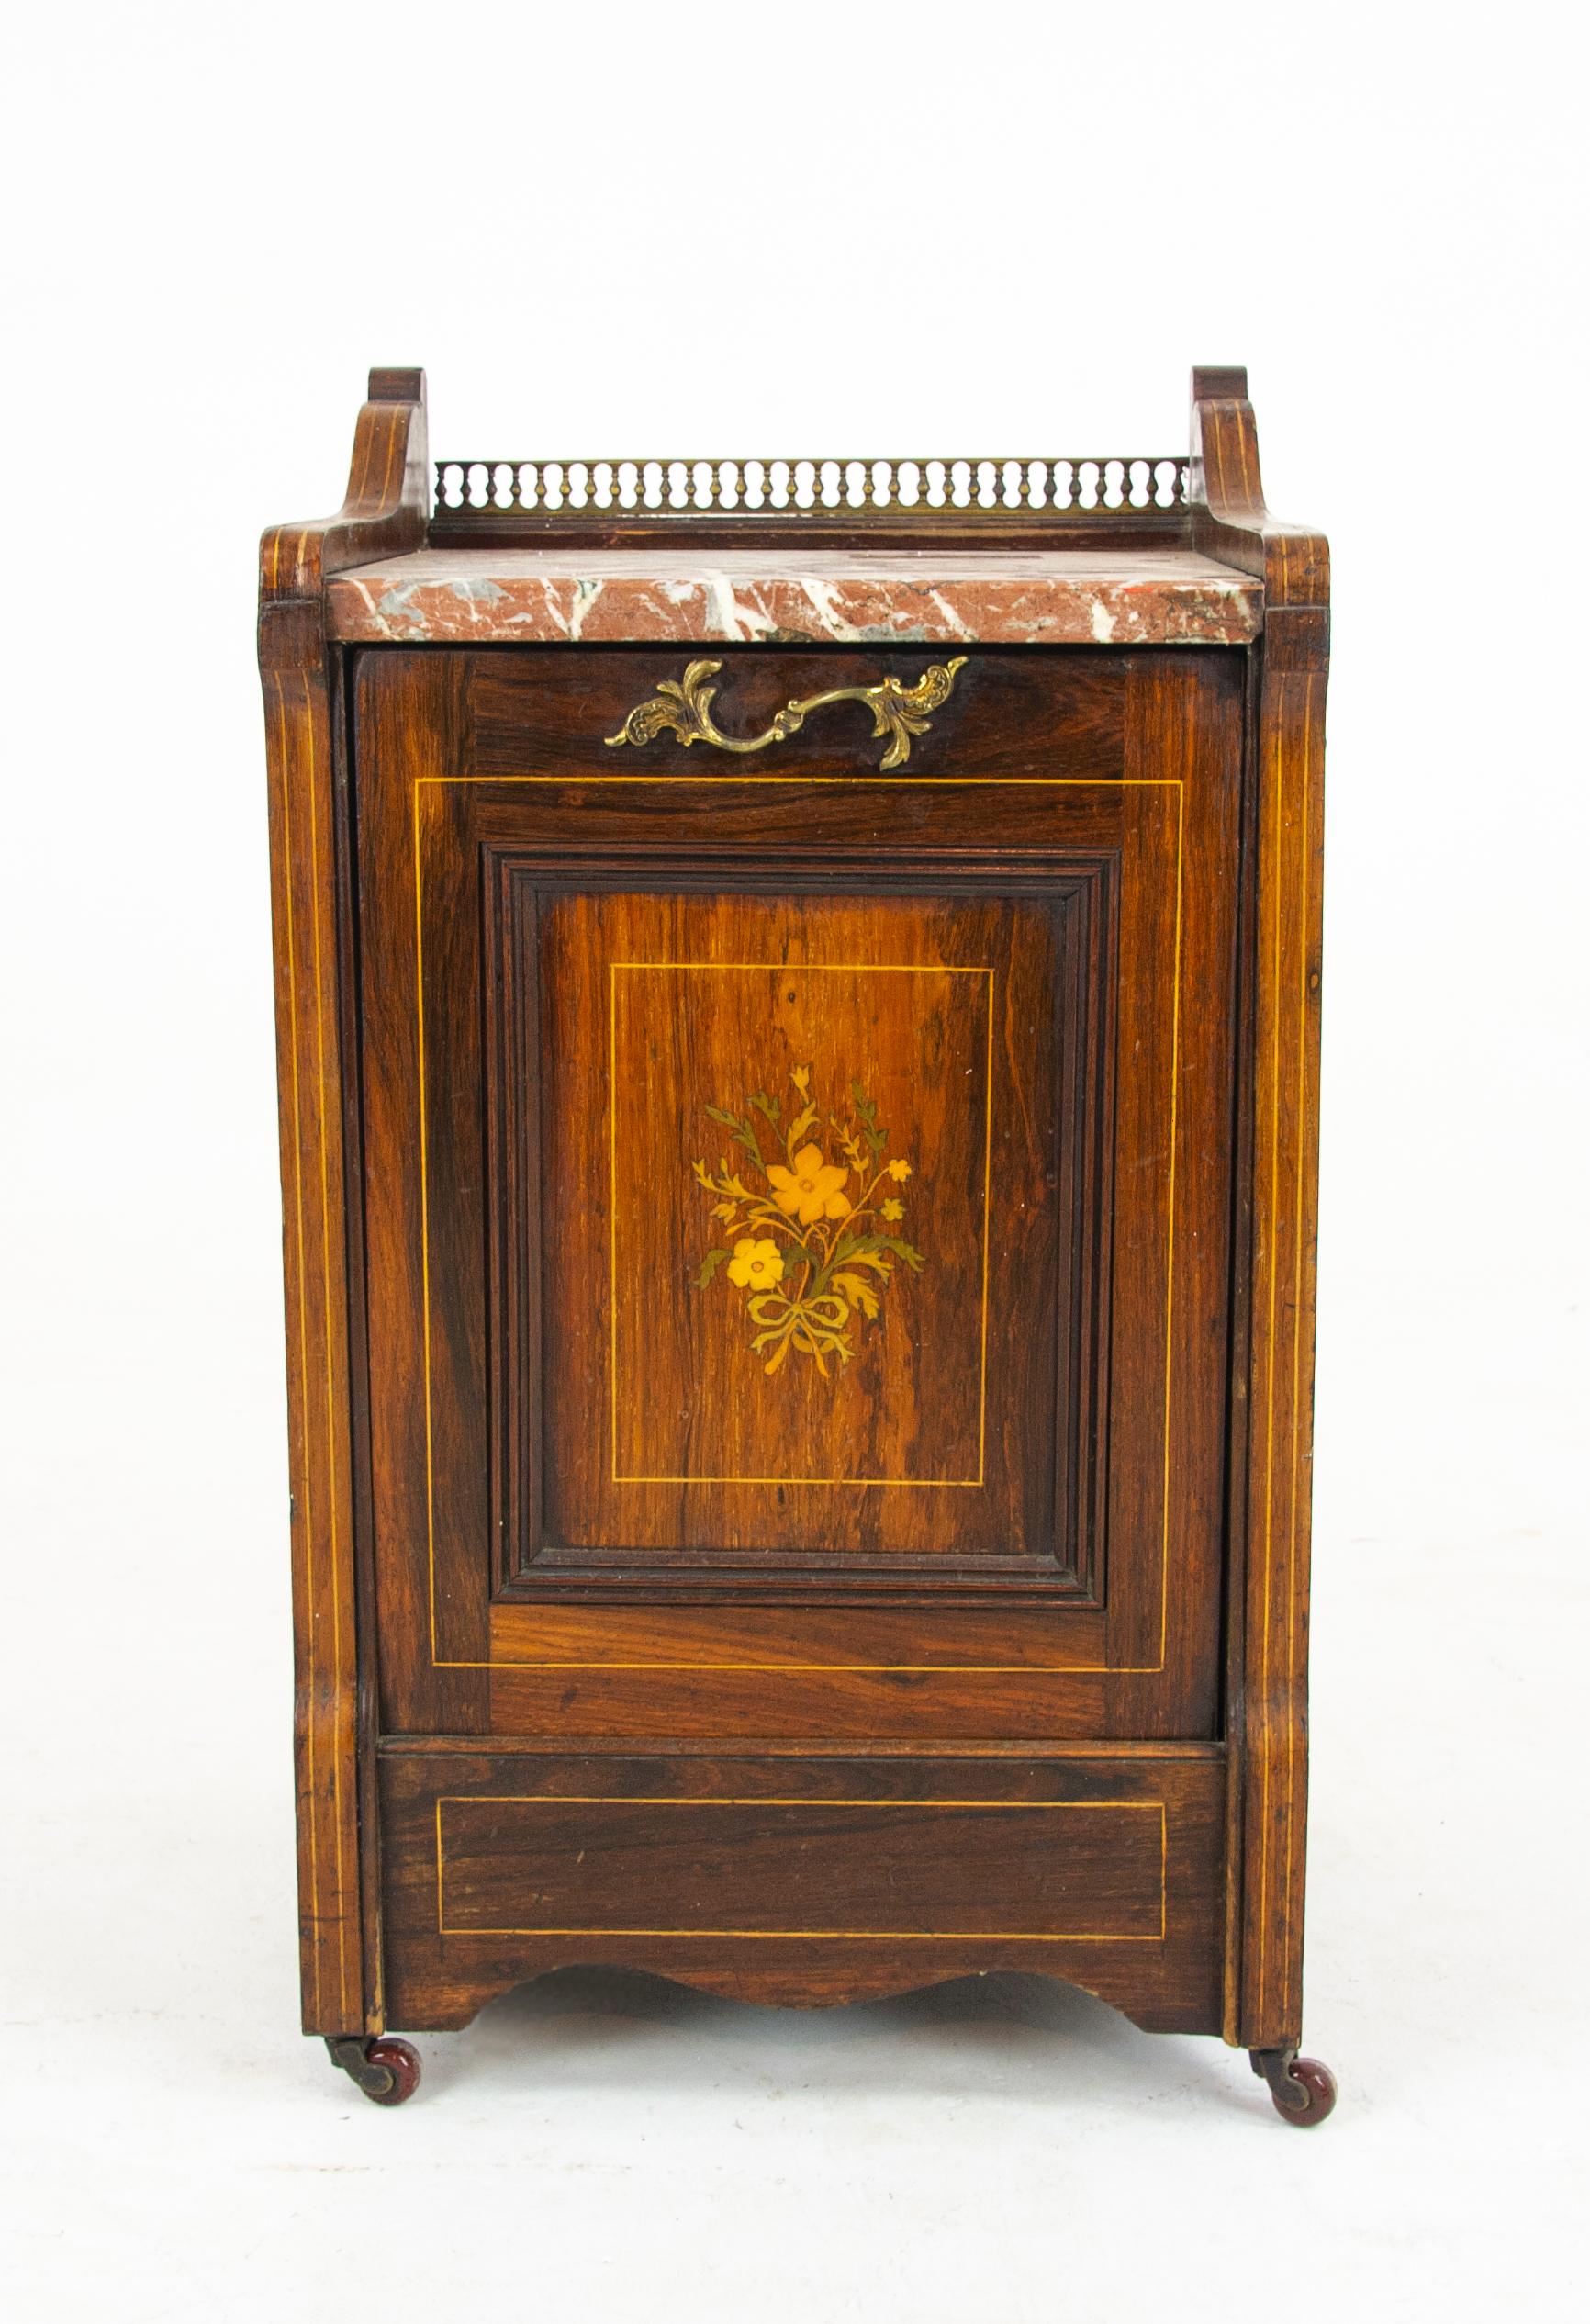 Antique coal Hod, walnut coal box, coal scuttle, marble, Scotland 1880, Antique Furniture, B1262

Scotland, 1880
Brass gallery along the back
Rouge marble-top
Fine satinwood inlay on sides
Original brass handles on sides
Metal liner and